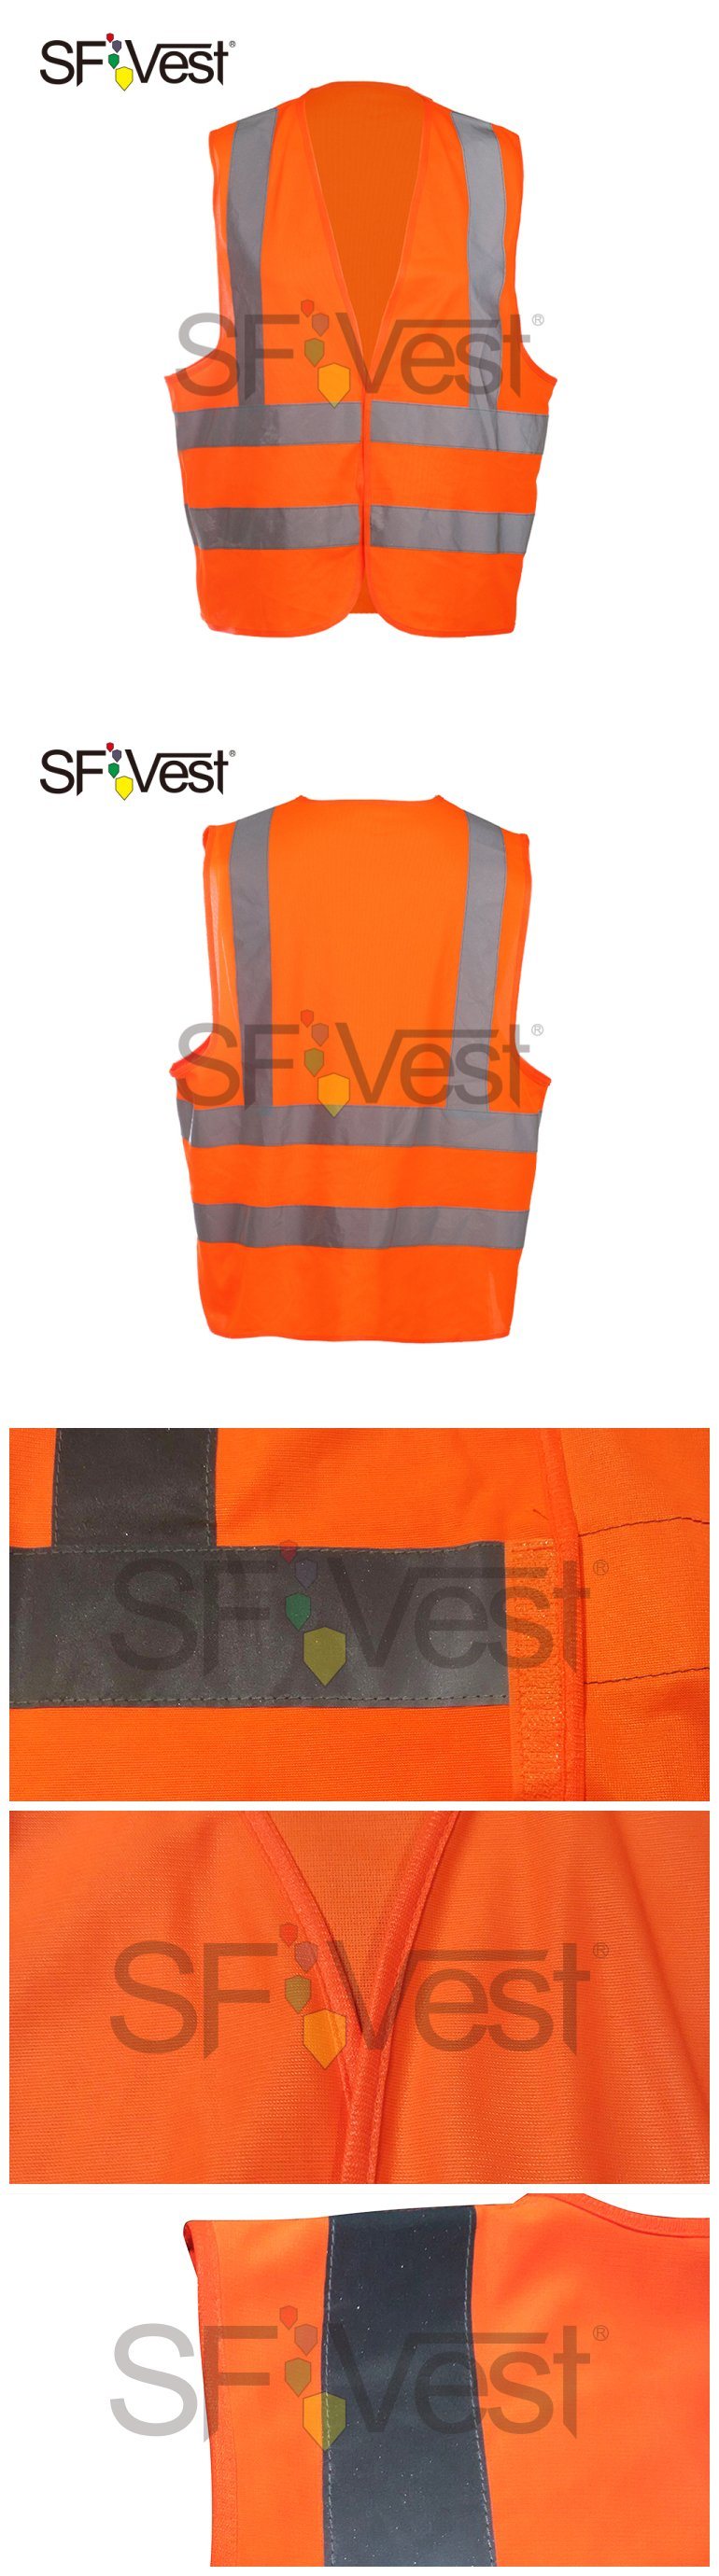 2020 High Visibility Safety Reflective Clothing Children Protect Outdoor Security Vest with En 1150